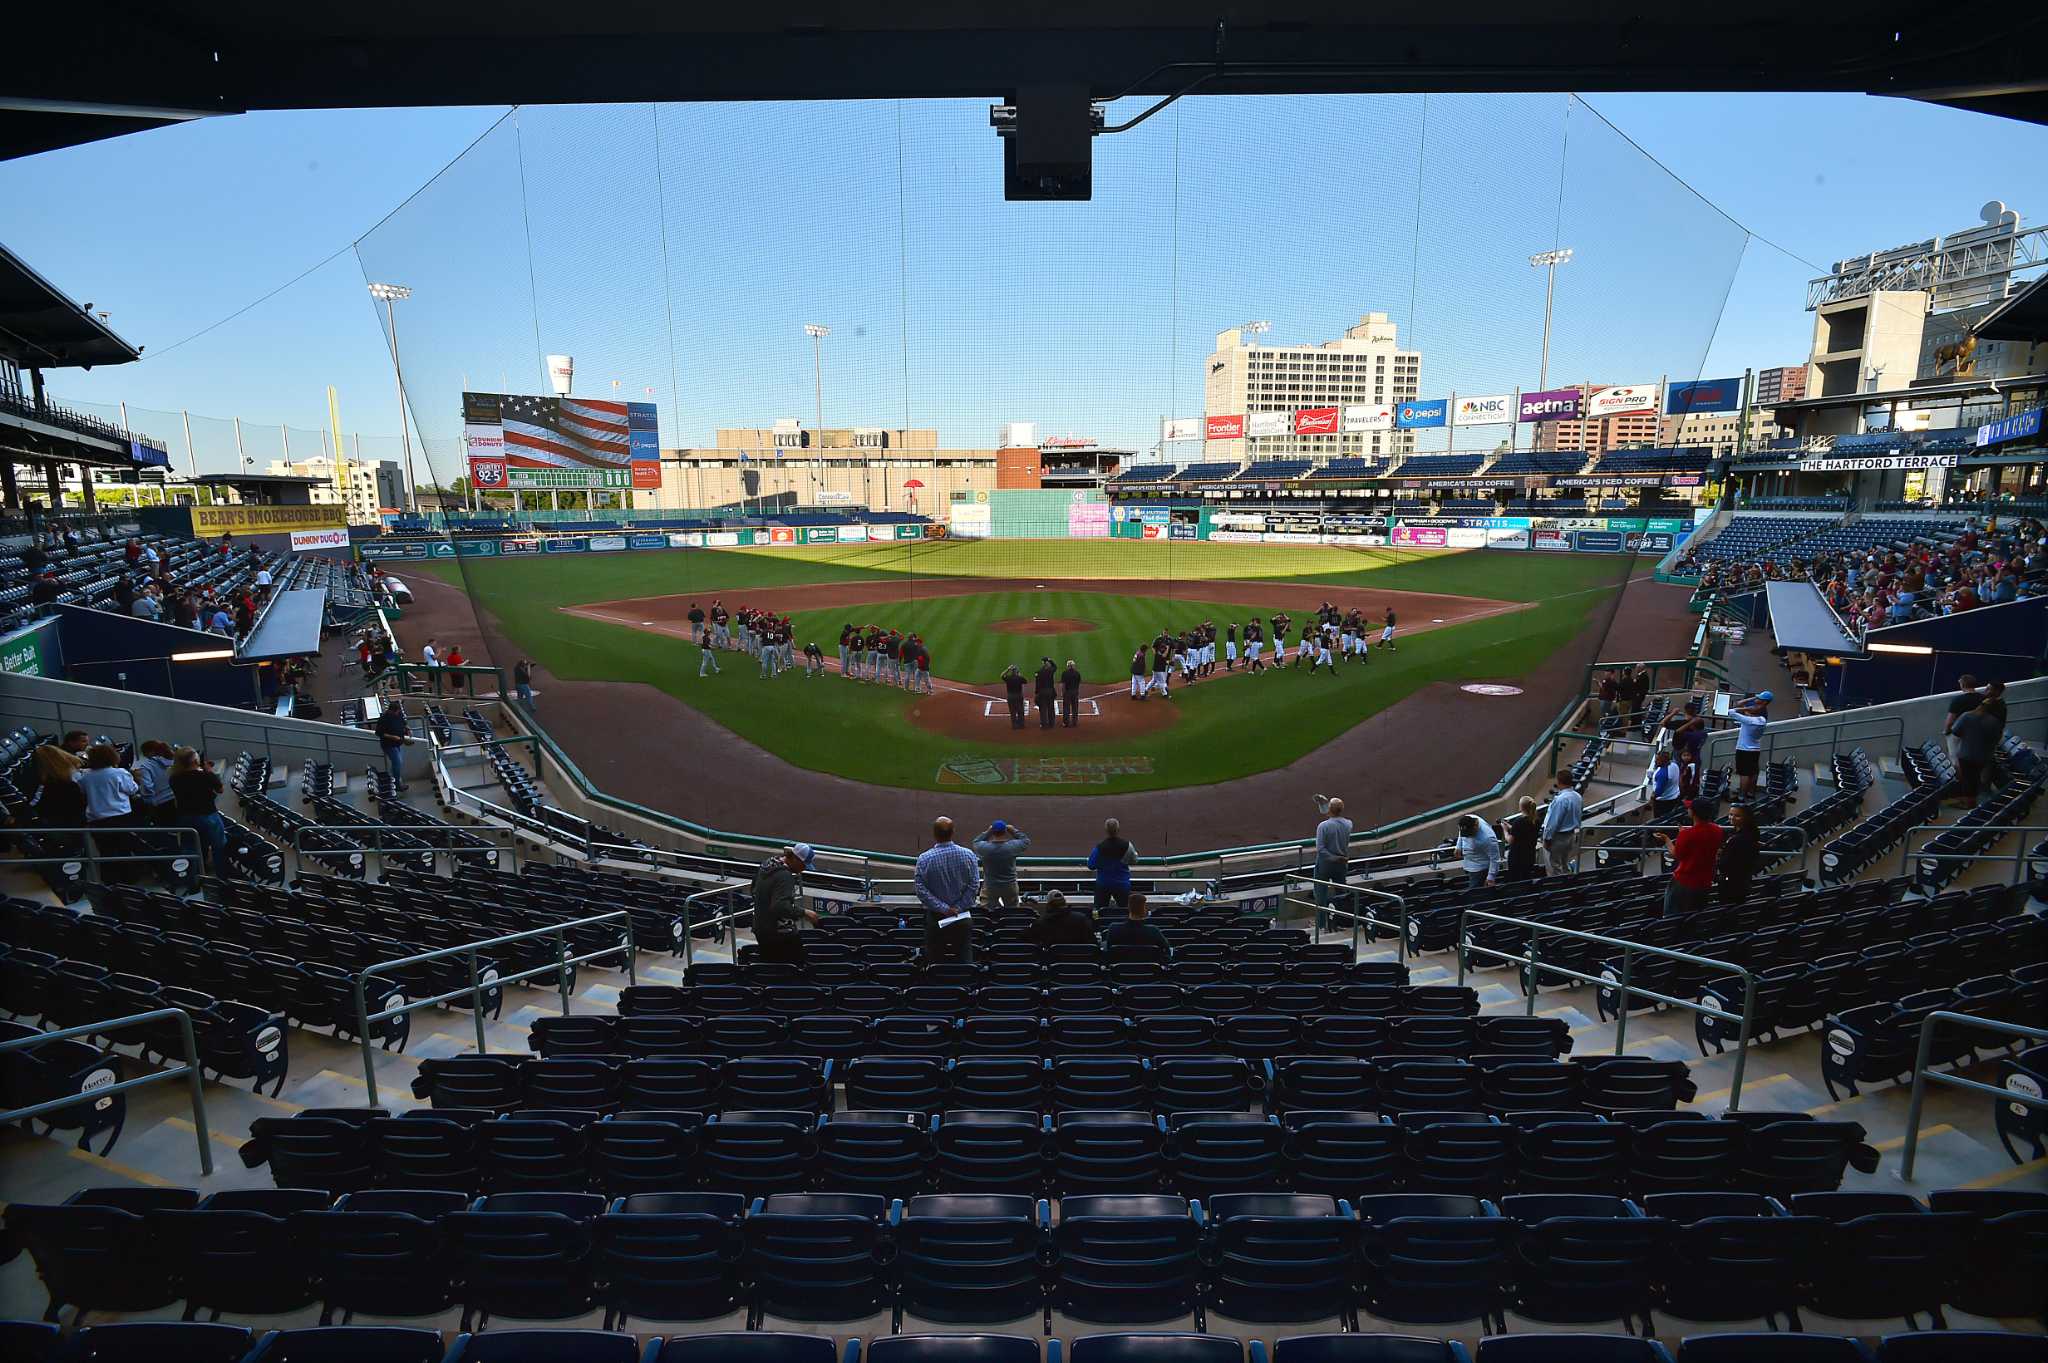 Here’s what the Yard Goats home opener will look like